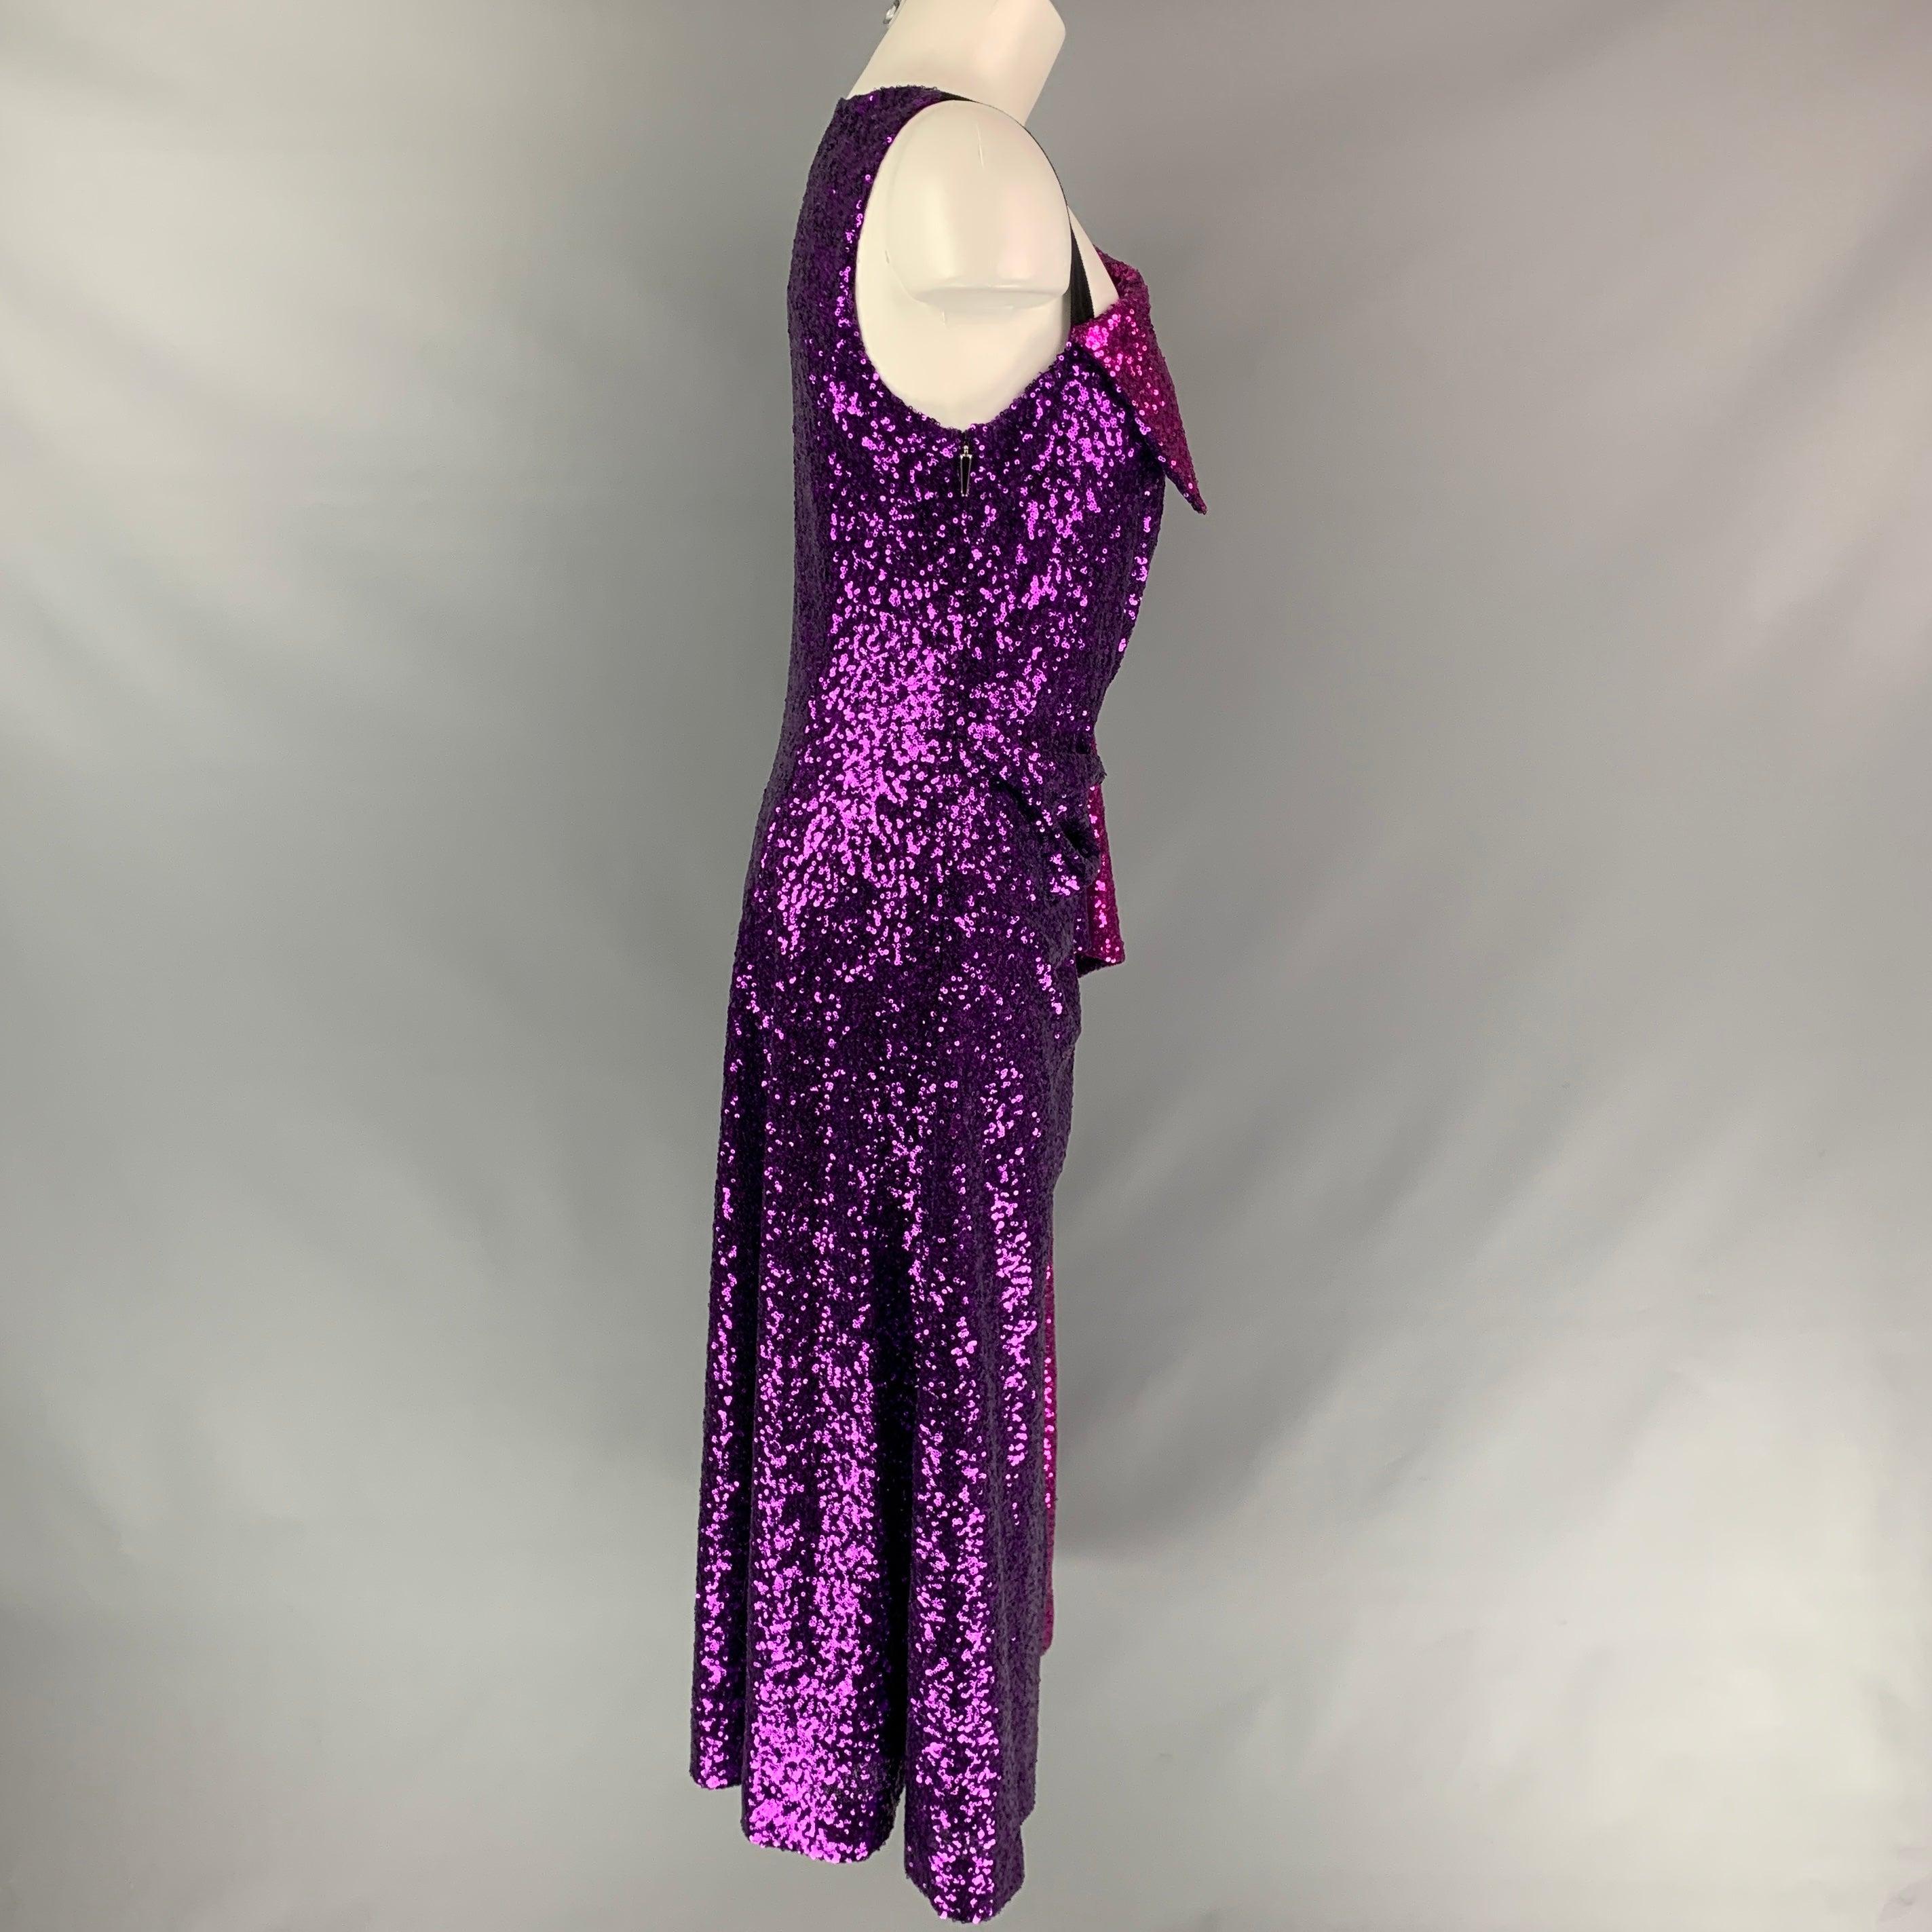 PRABAL GURUNG Size 6 Purple & Fuchsia Polyester Sequined Dress In Excellent Condition For Sale In San Francisco, CA